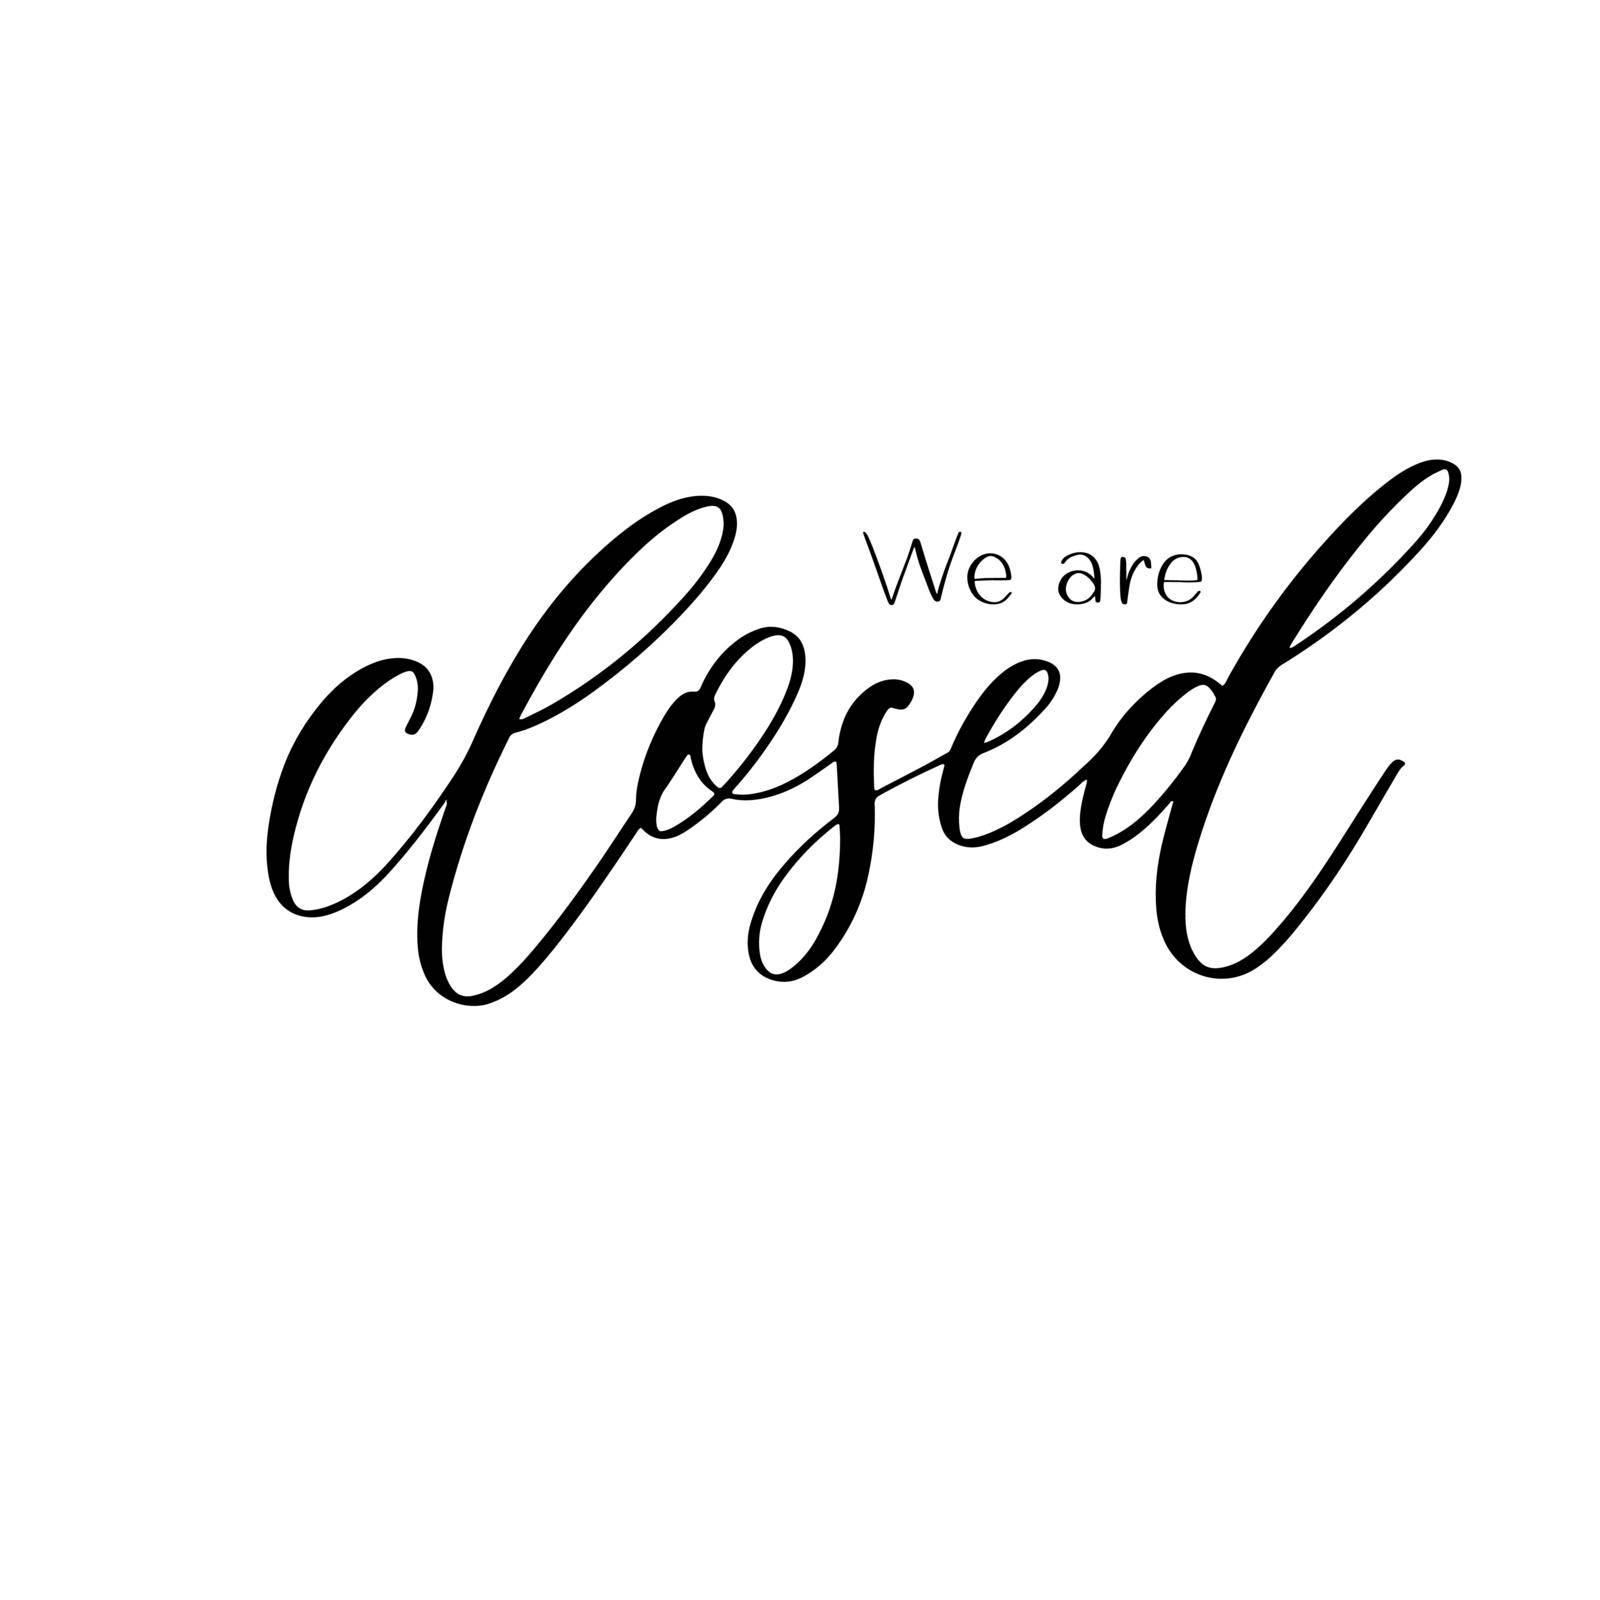 We are closed. Hand lettering and modern calligraphy inscription for score